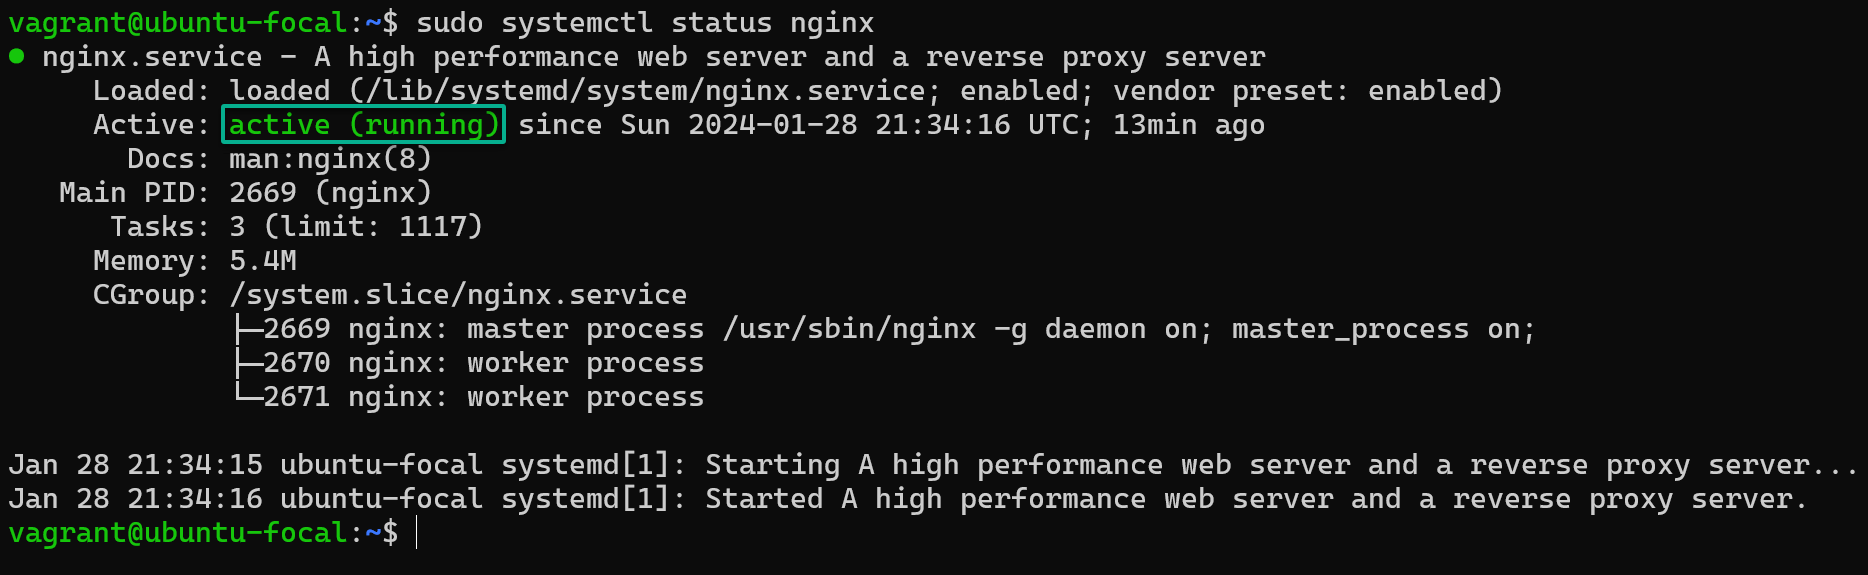 Verifying NGINX has been correctly installed